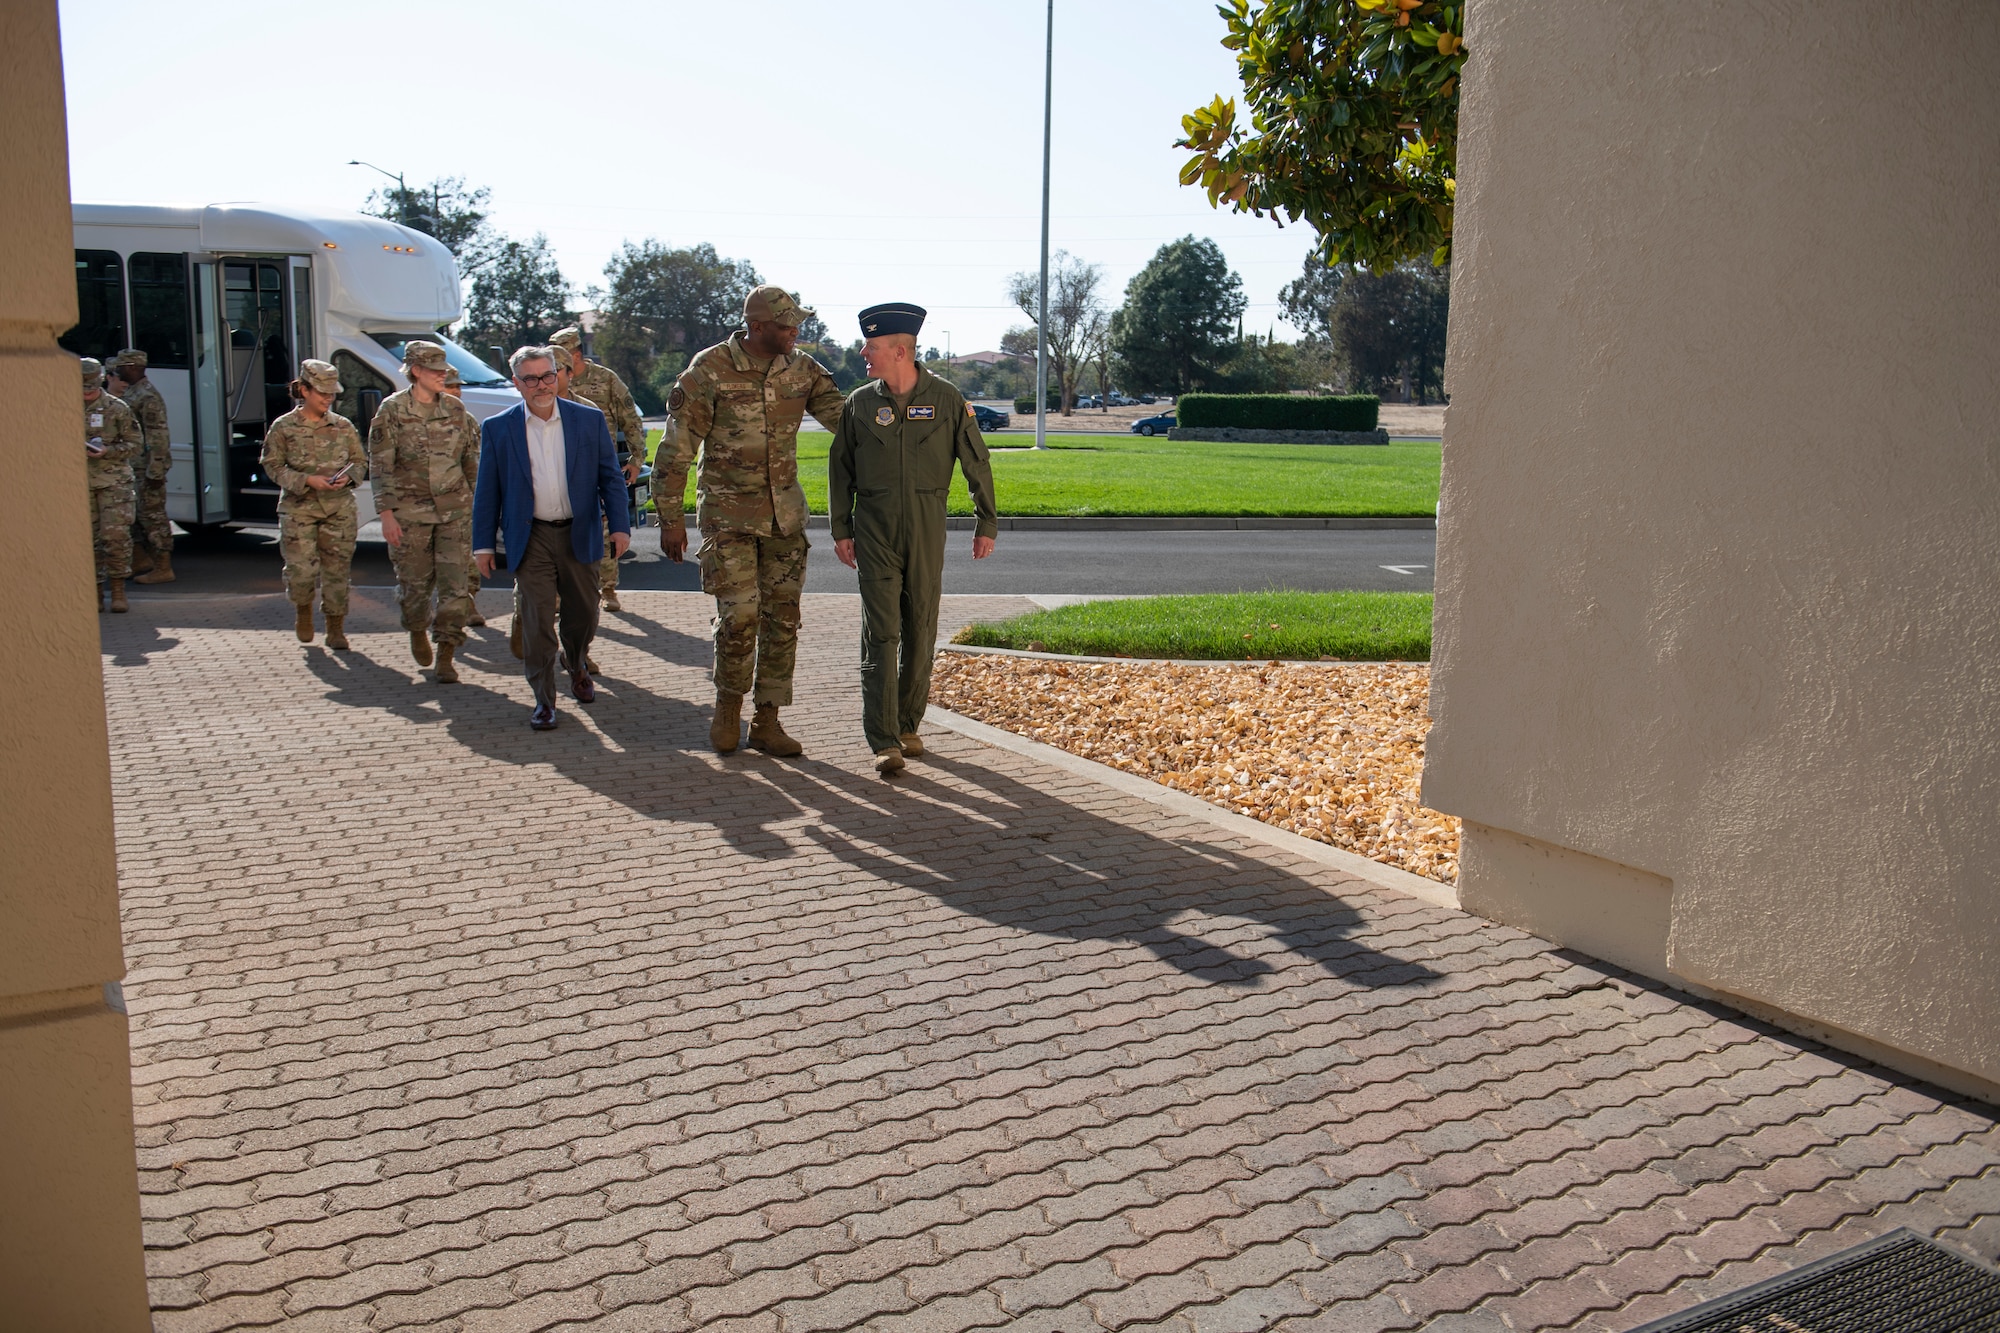 A group of Airmen and a civilian walk towards the entrance of a building at Travis Air Force Base, California, Oct. 12, 2022.